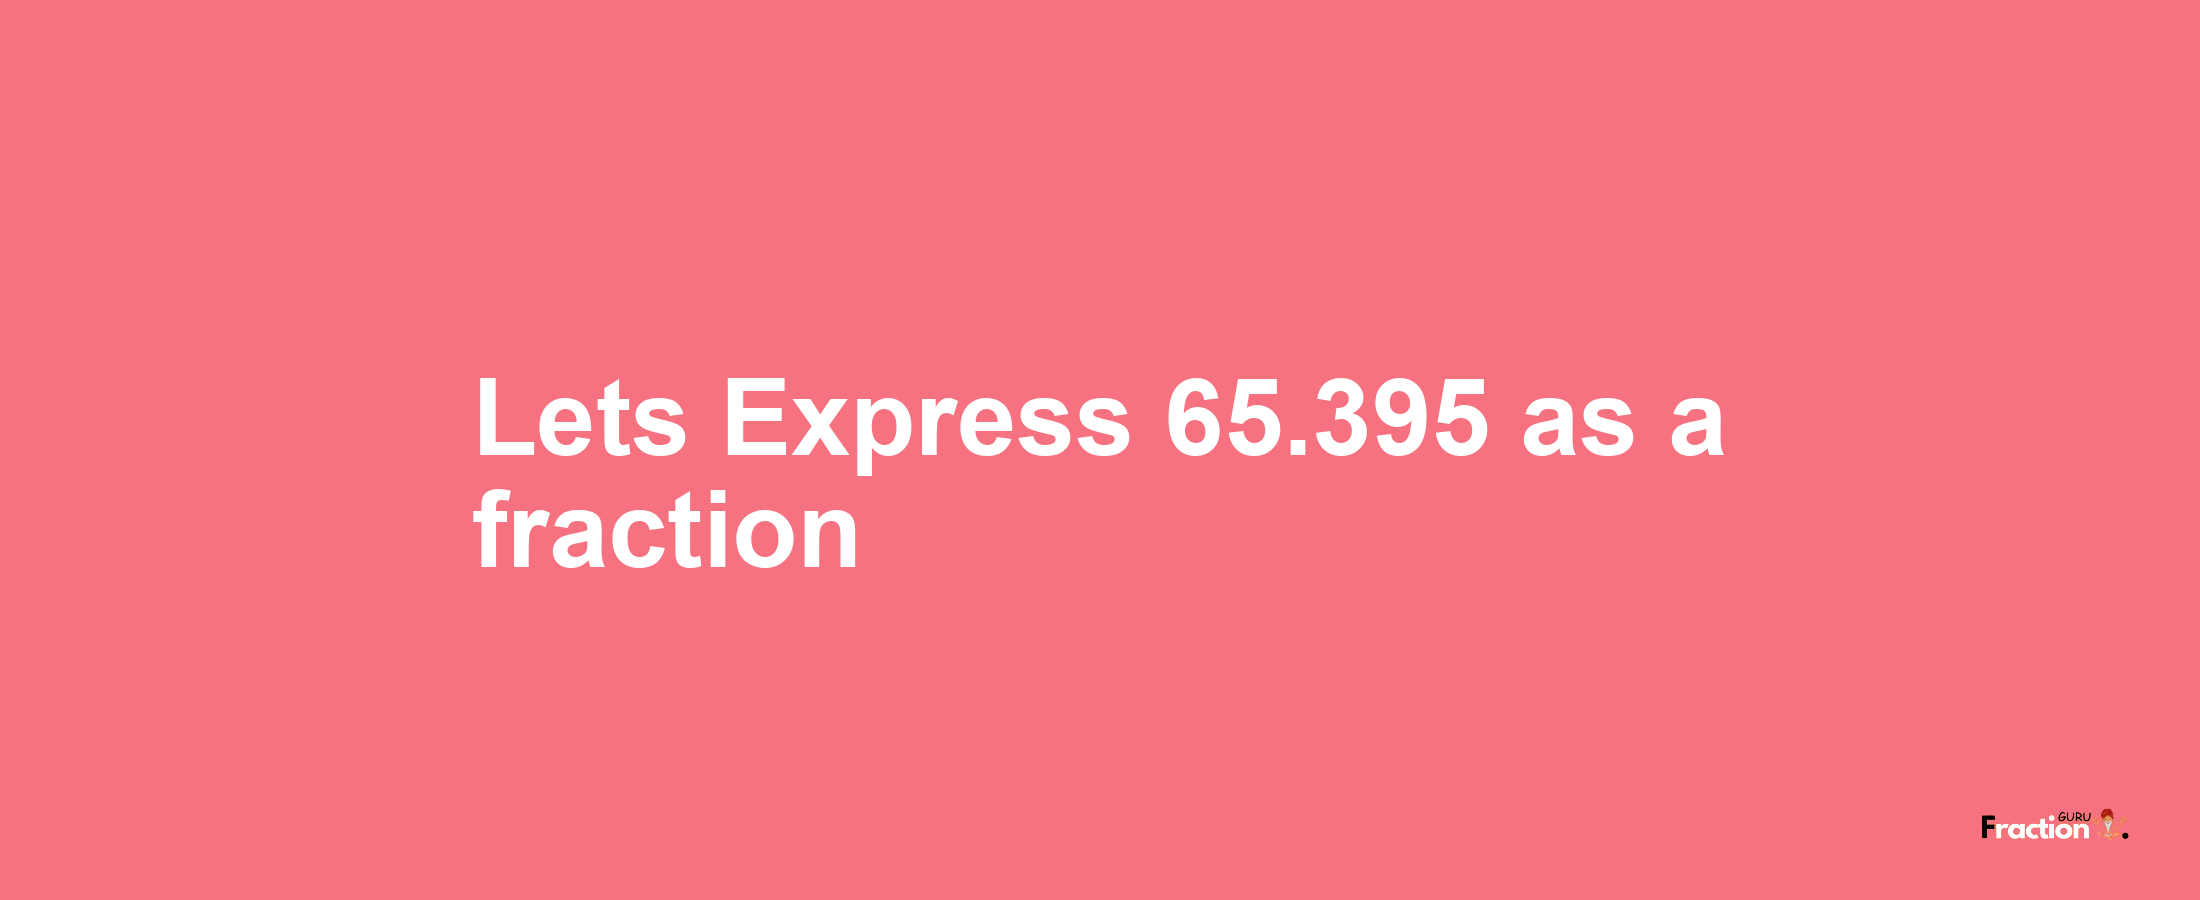 Lets Express 65.395 as afraction